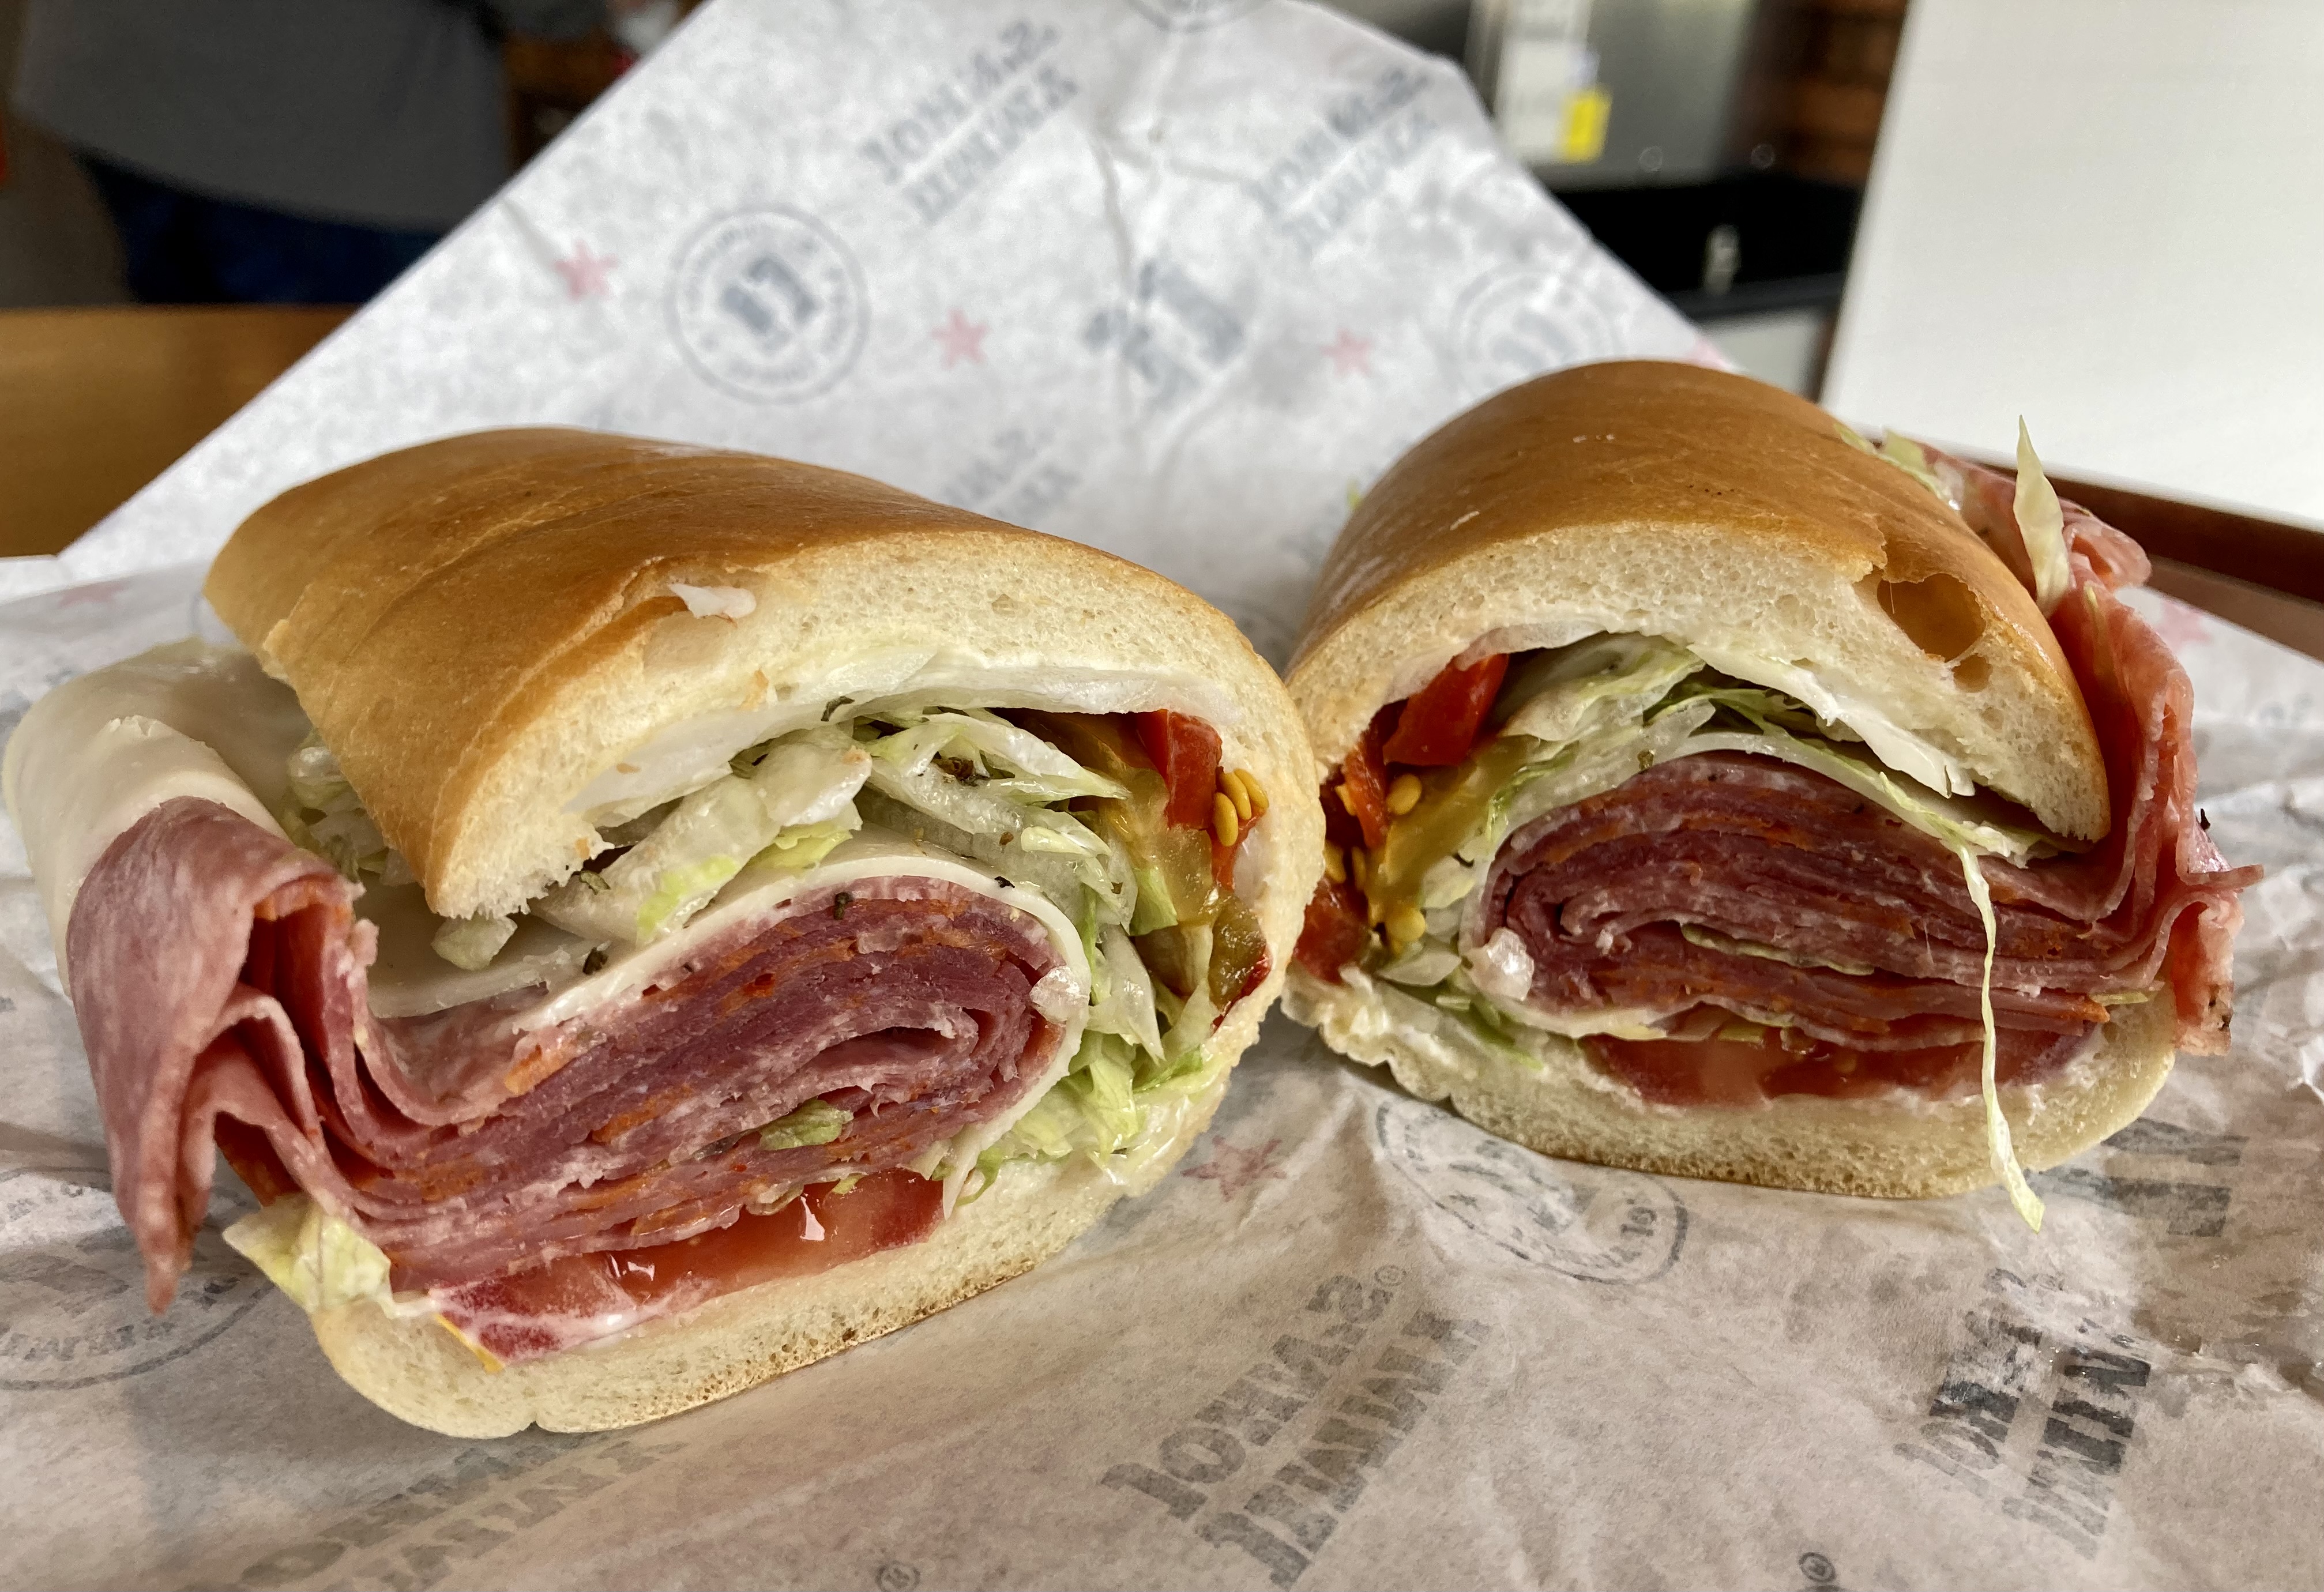 Ranking 12 Italian subs from 9 fast-food sub shops - cleveland.com